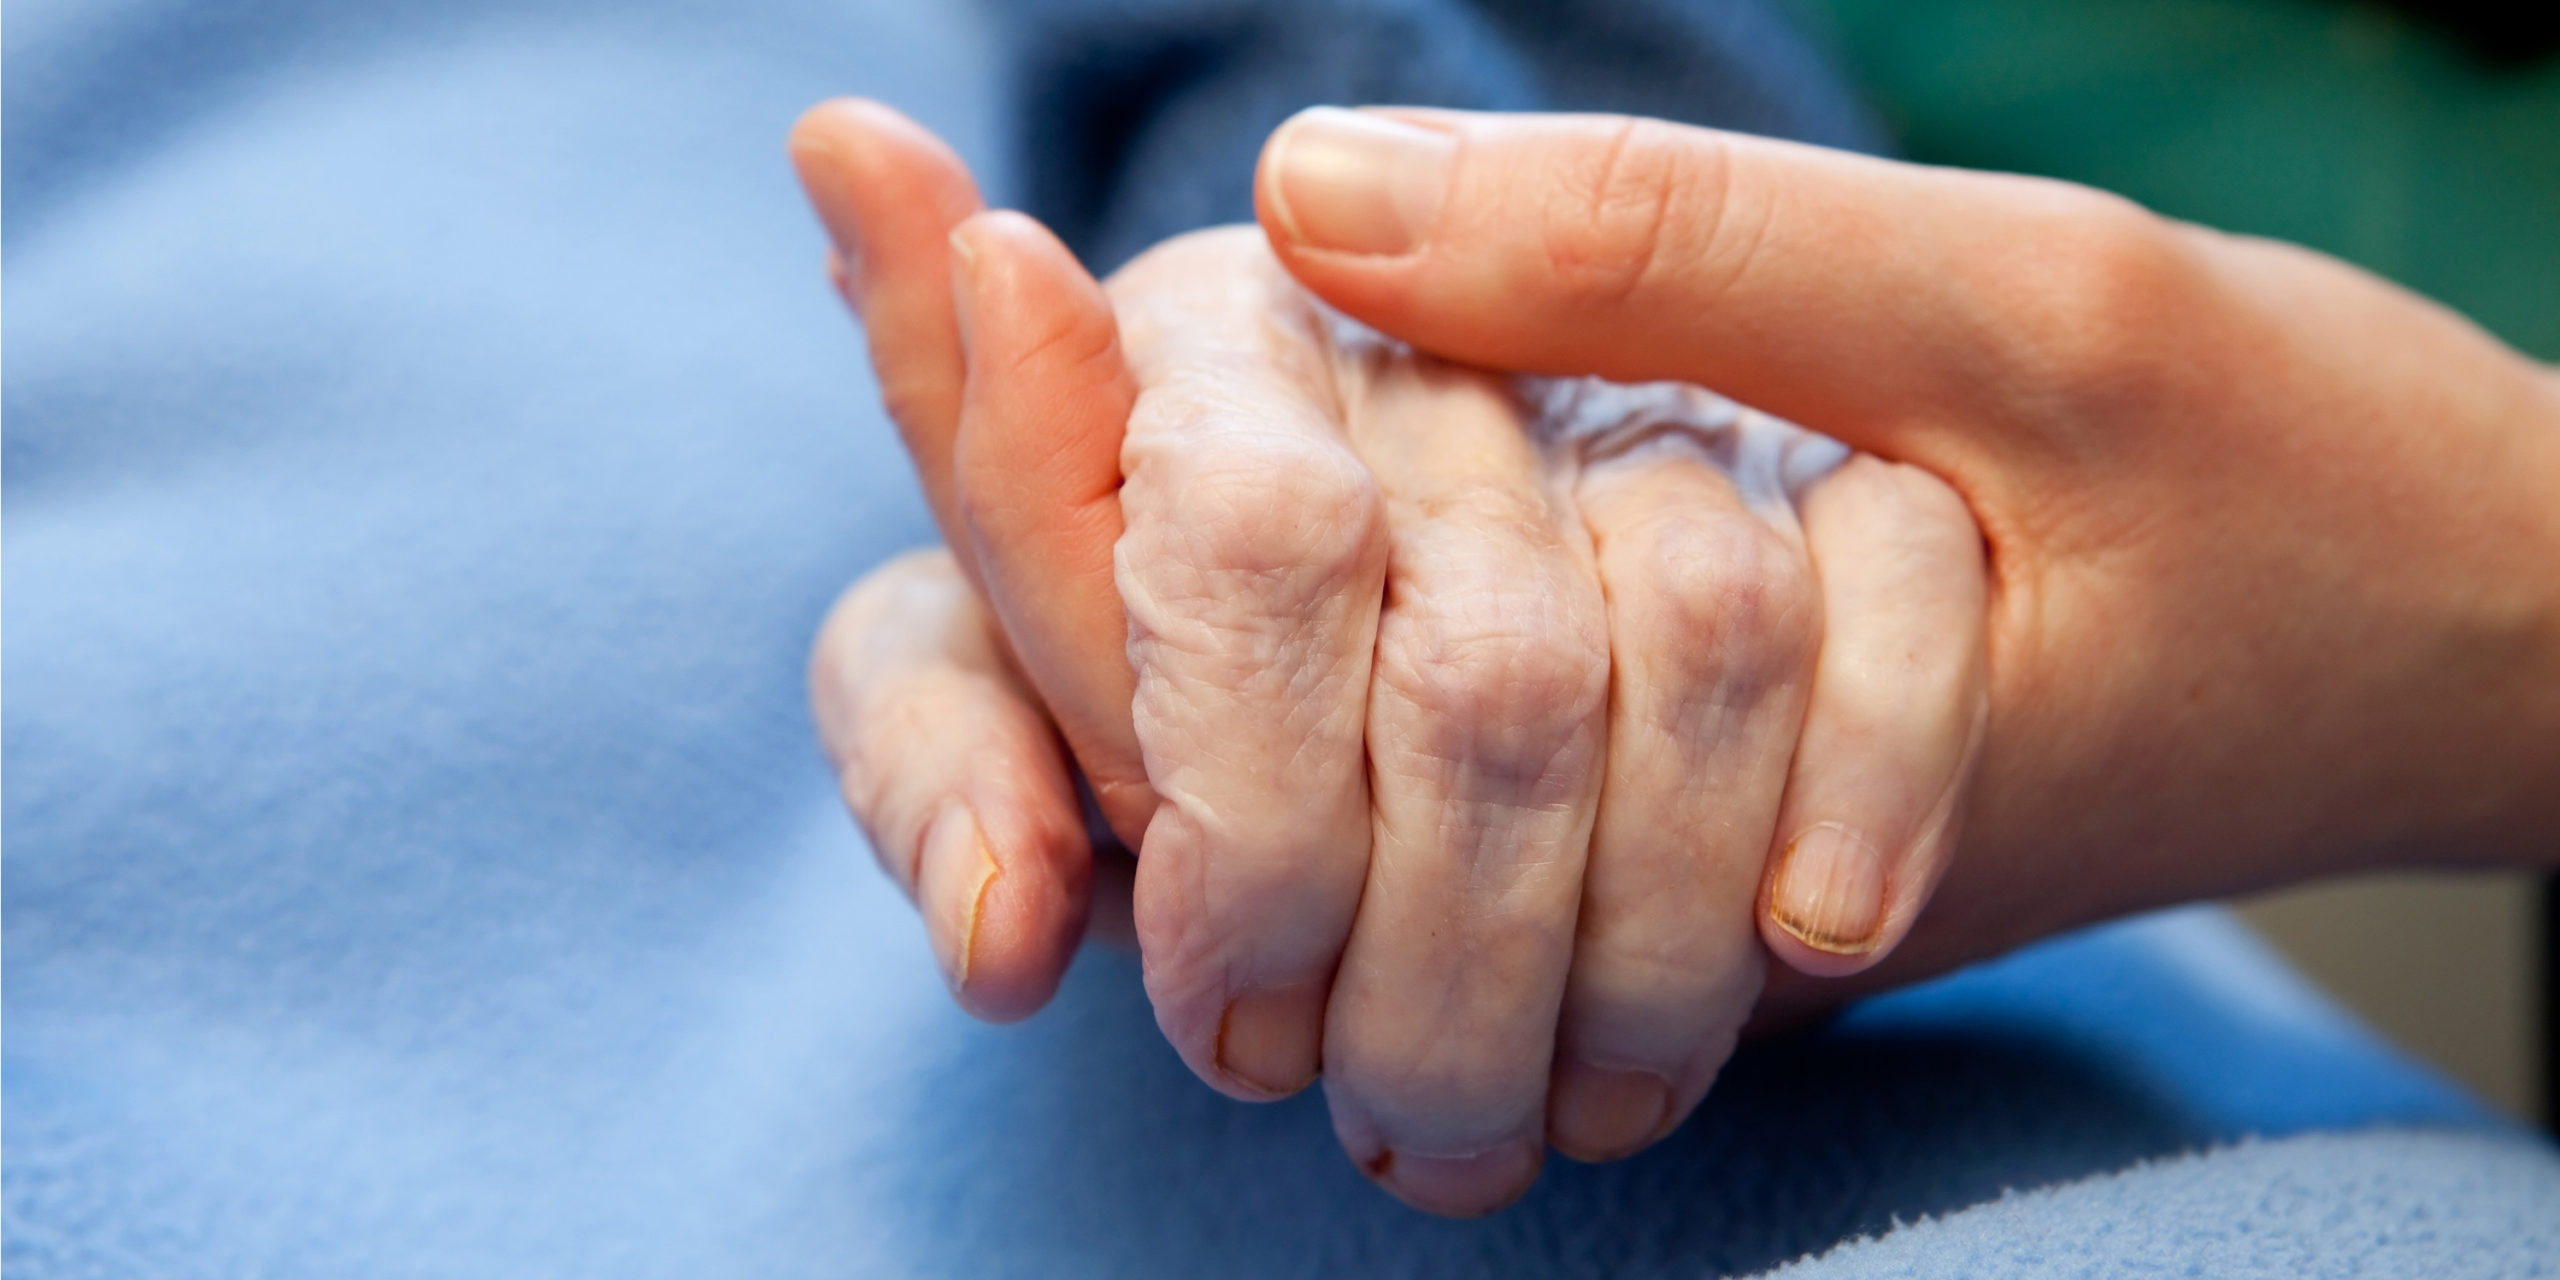 Elder Abuse Awareness: Signs to identify physical, emotional, financial abuse of loved ones